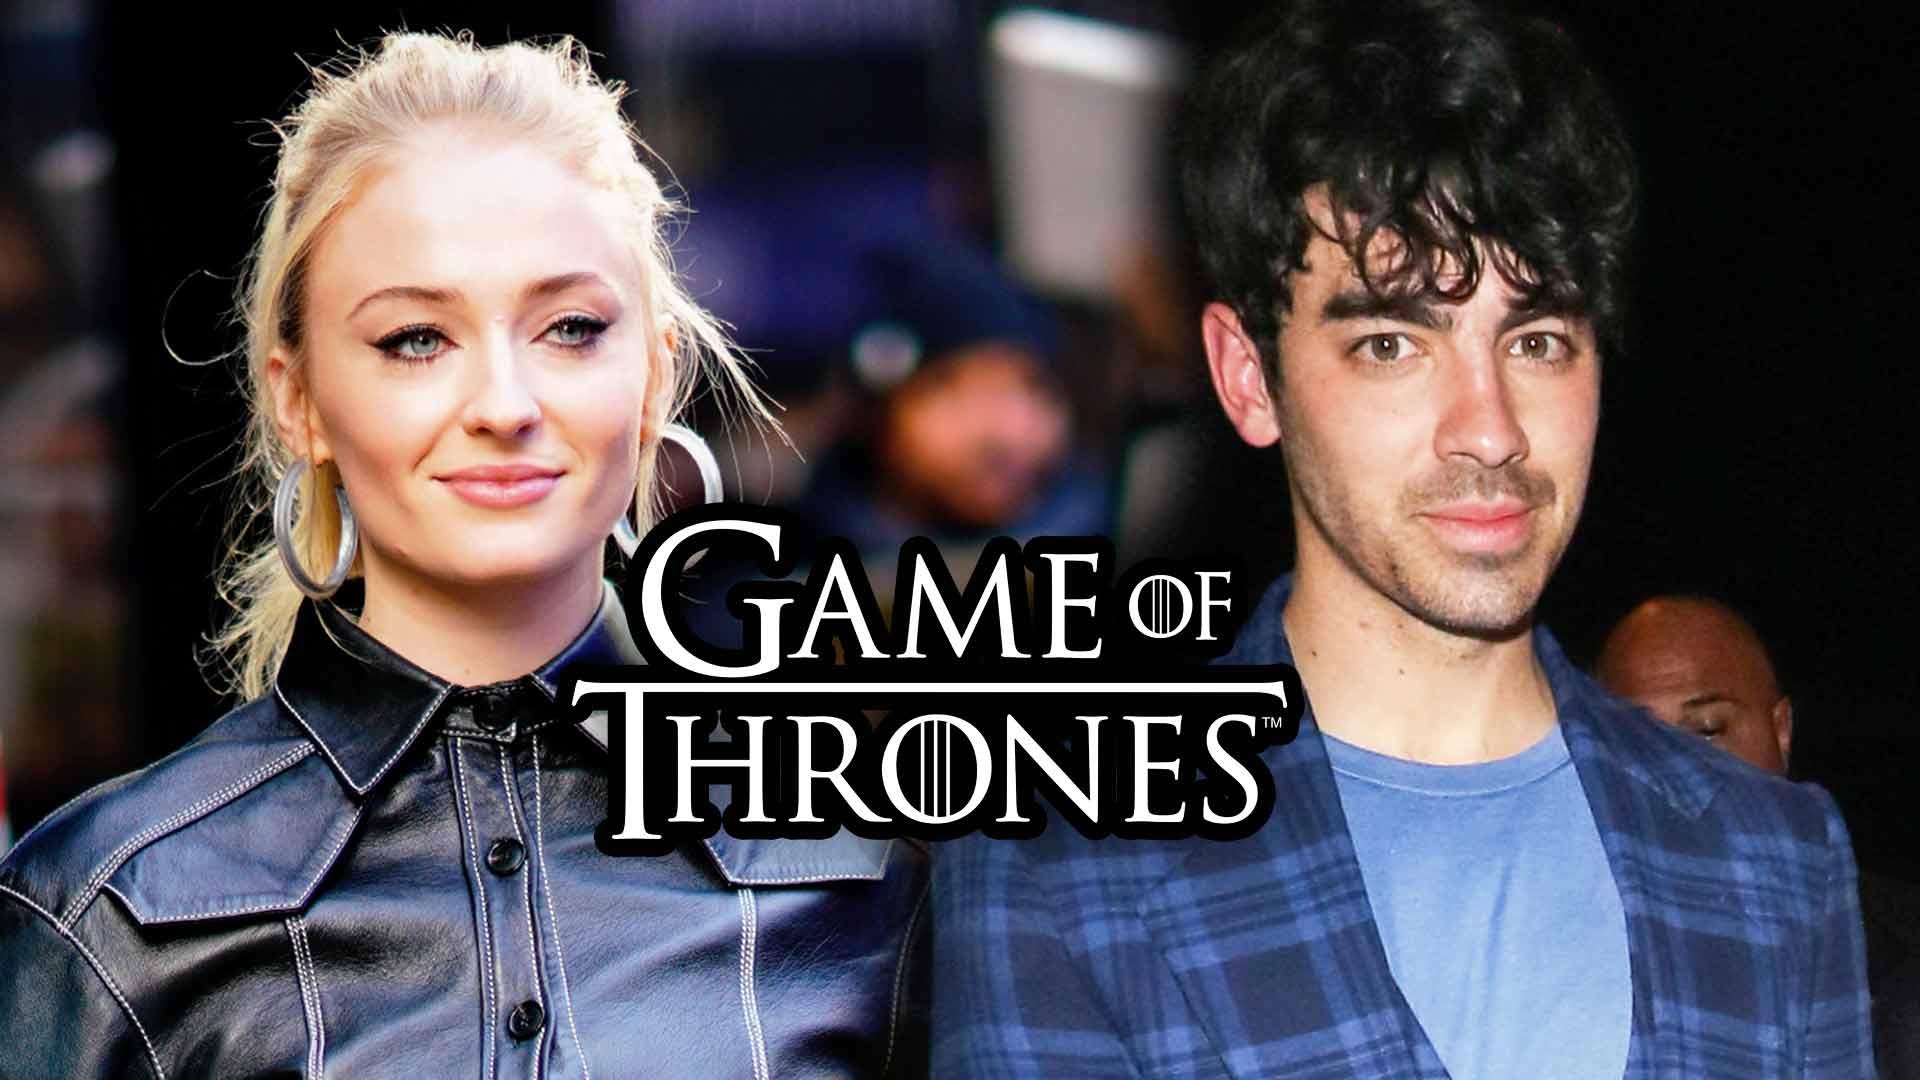 Joe Jonas Knows How ‘Game of Thrones’ Ends But He Cannot Tell You